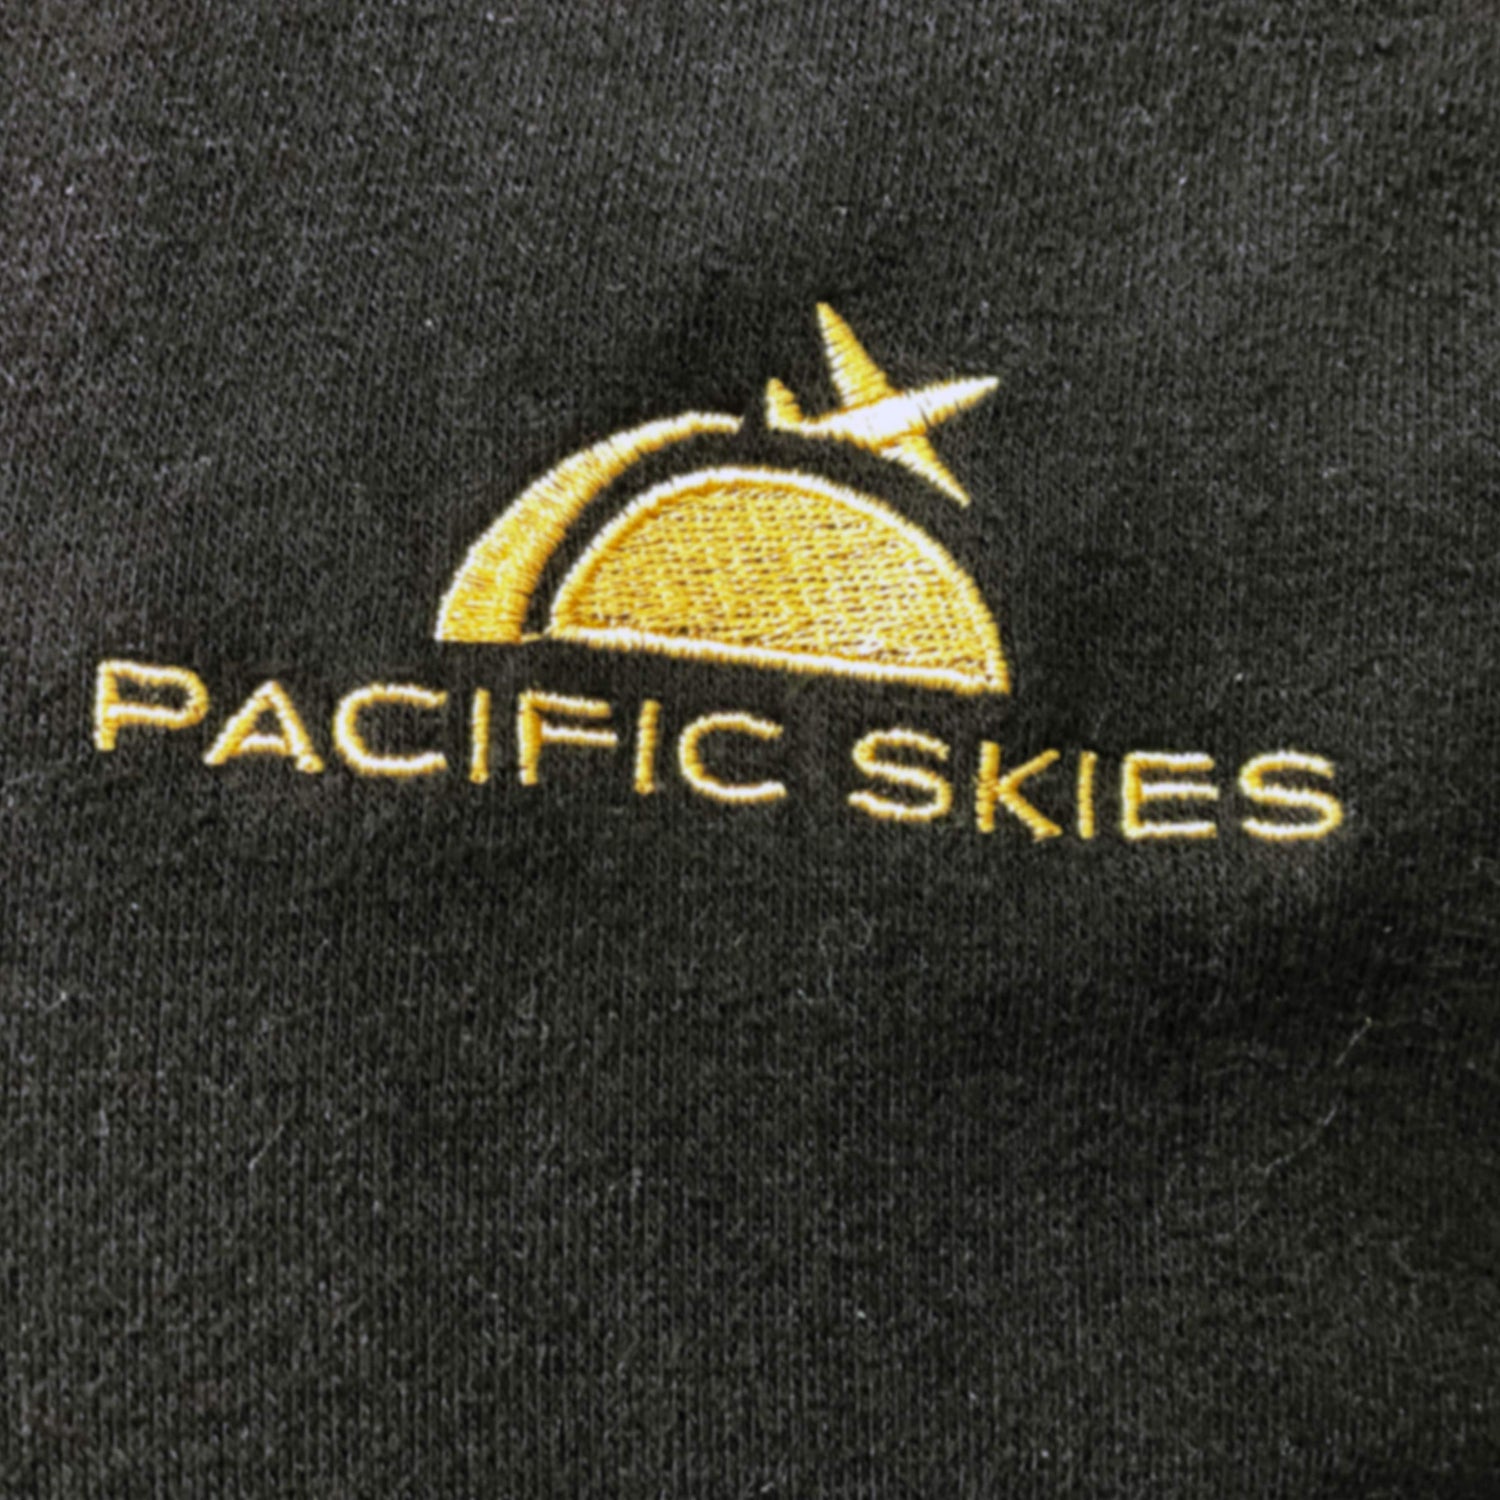 Pacific Skies gold stitiching